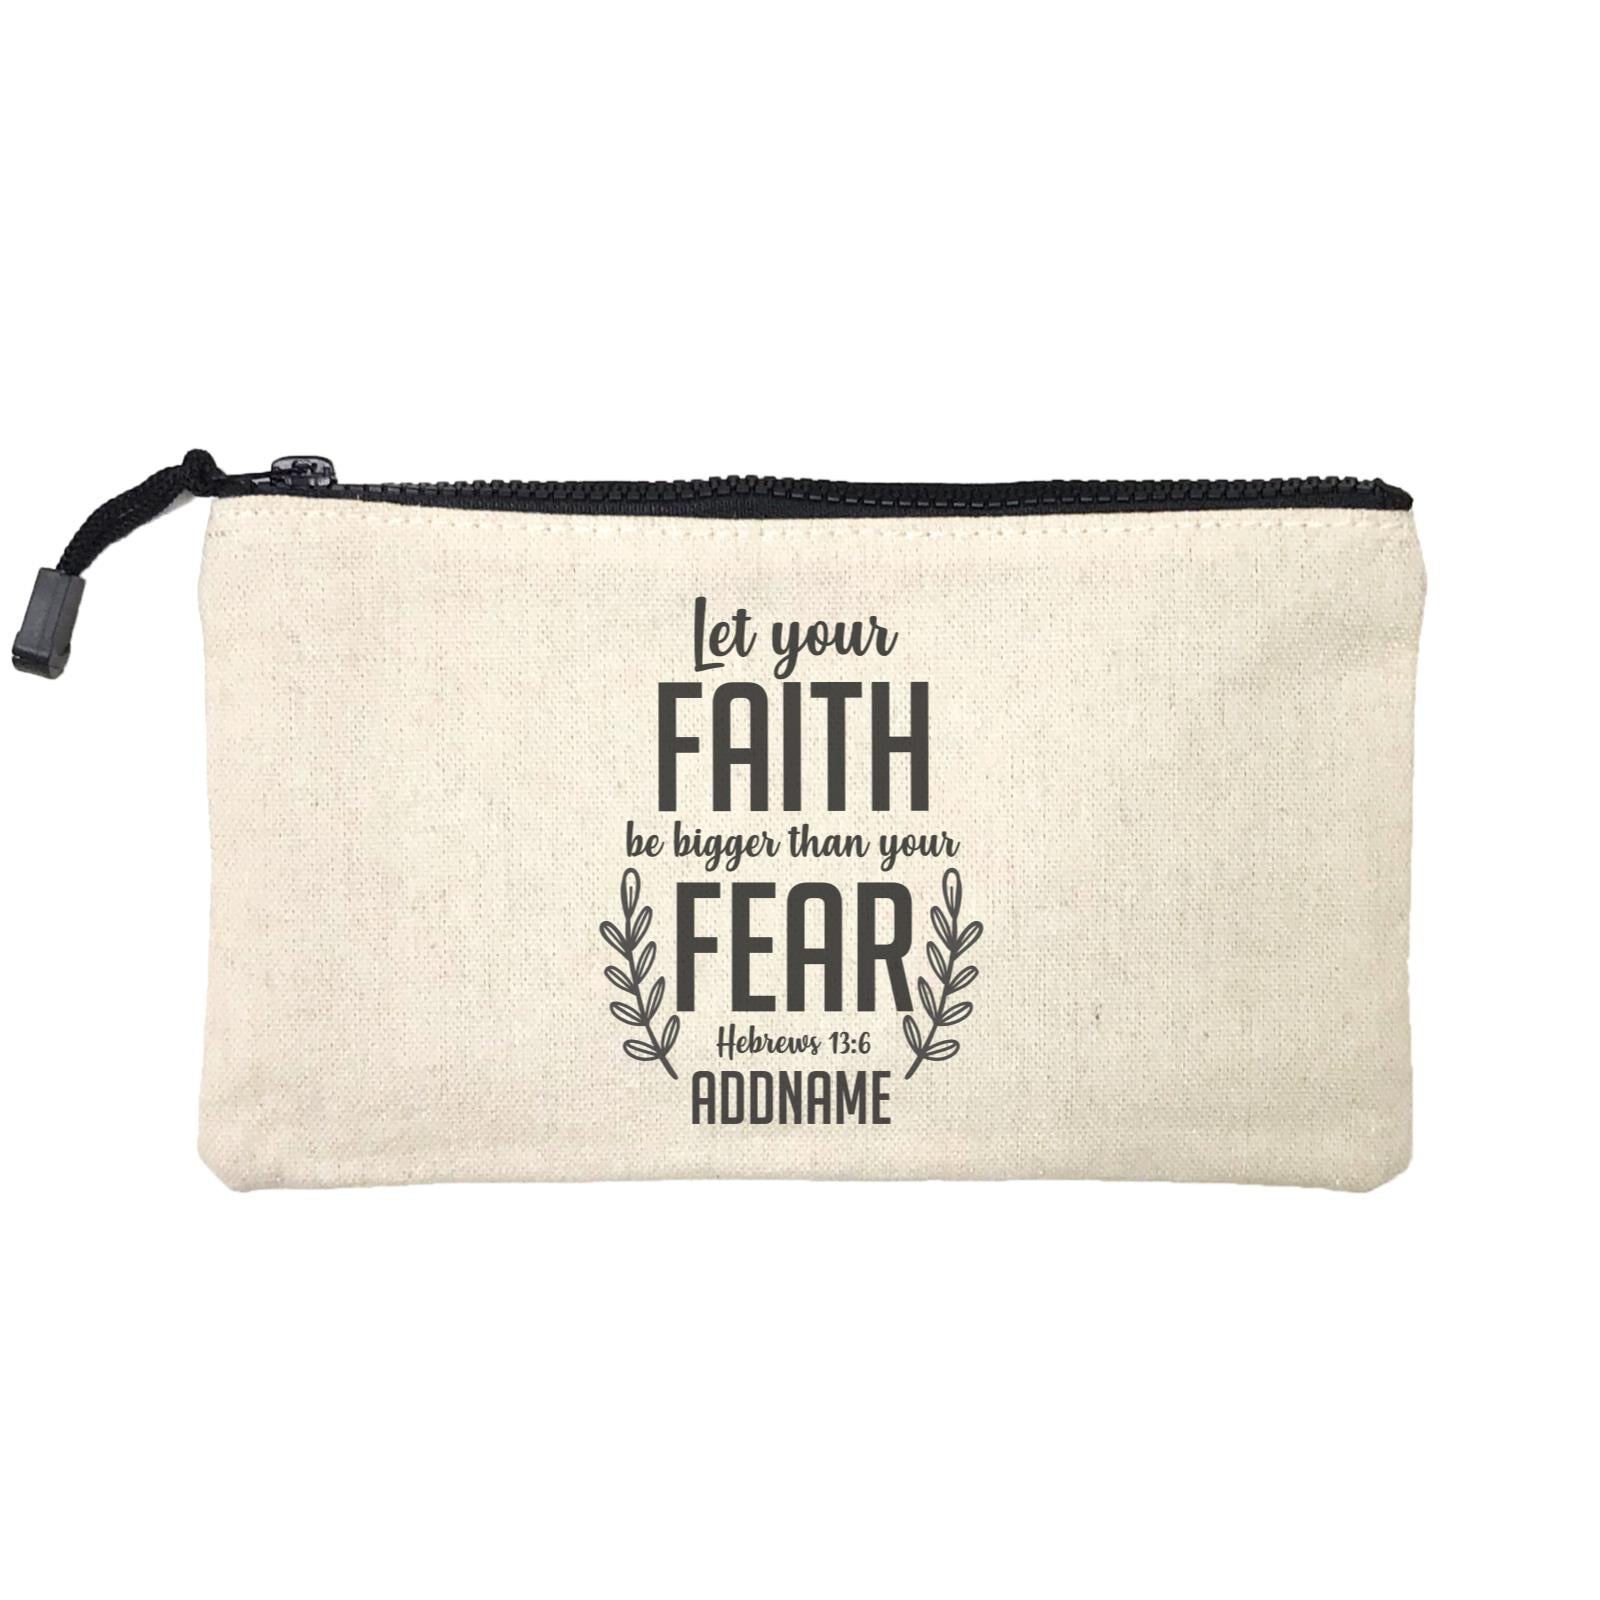 Christ Newborn Let Your Faith Be Bigger Than Your Fear Hebrews 13.6 Addname Mini Accessories Stationery Pouch